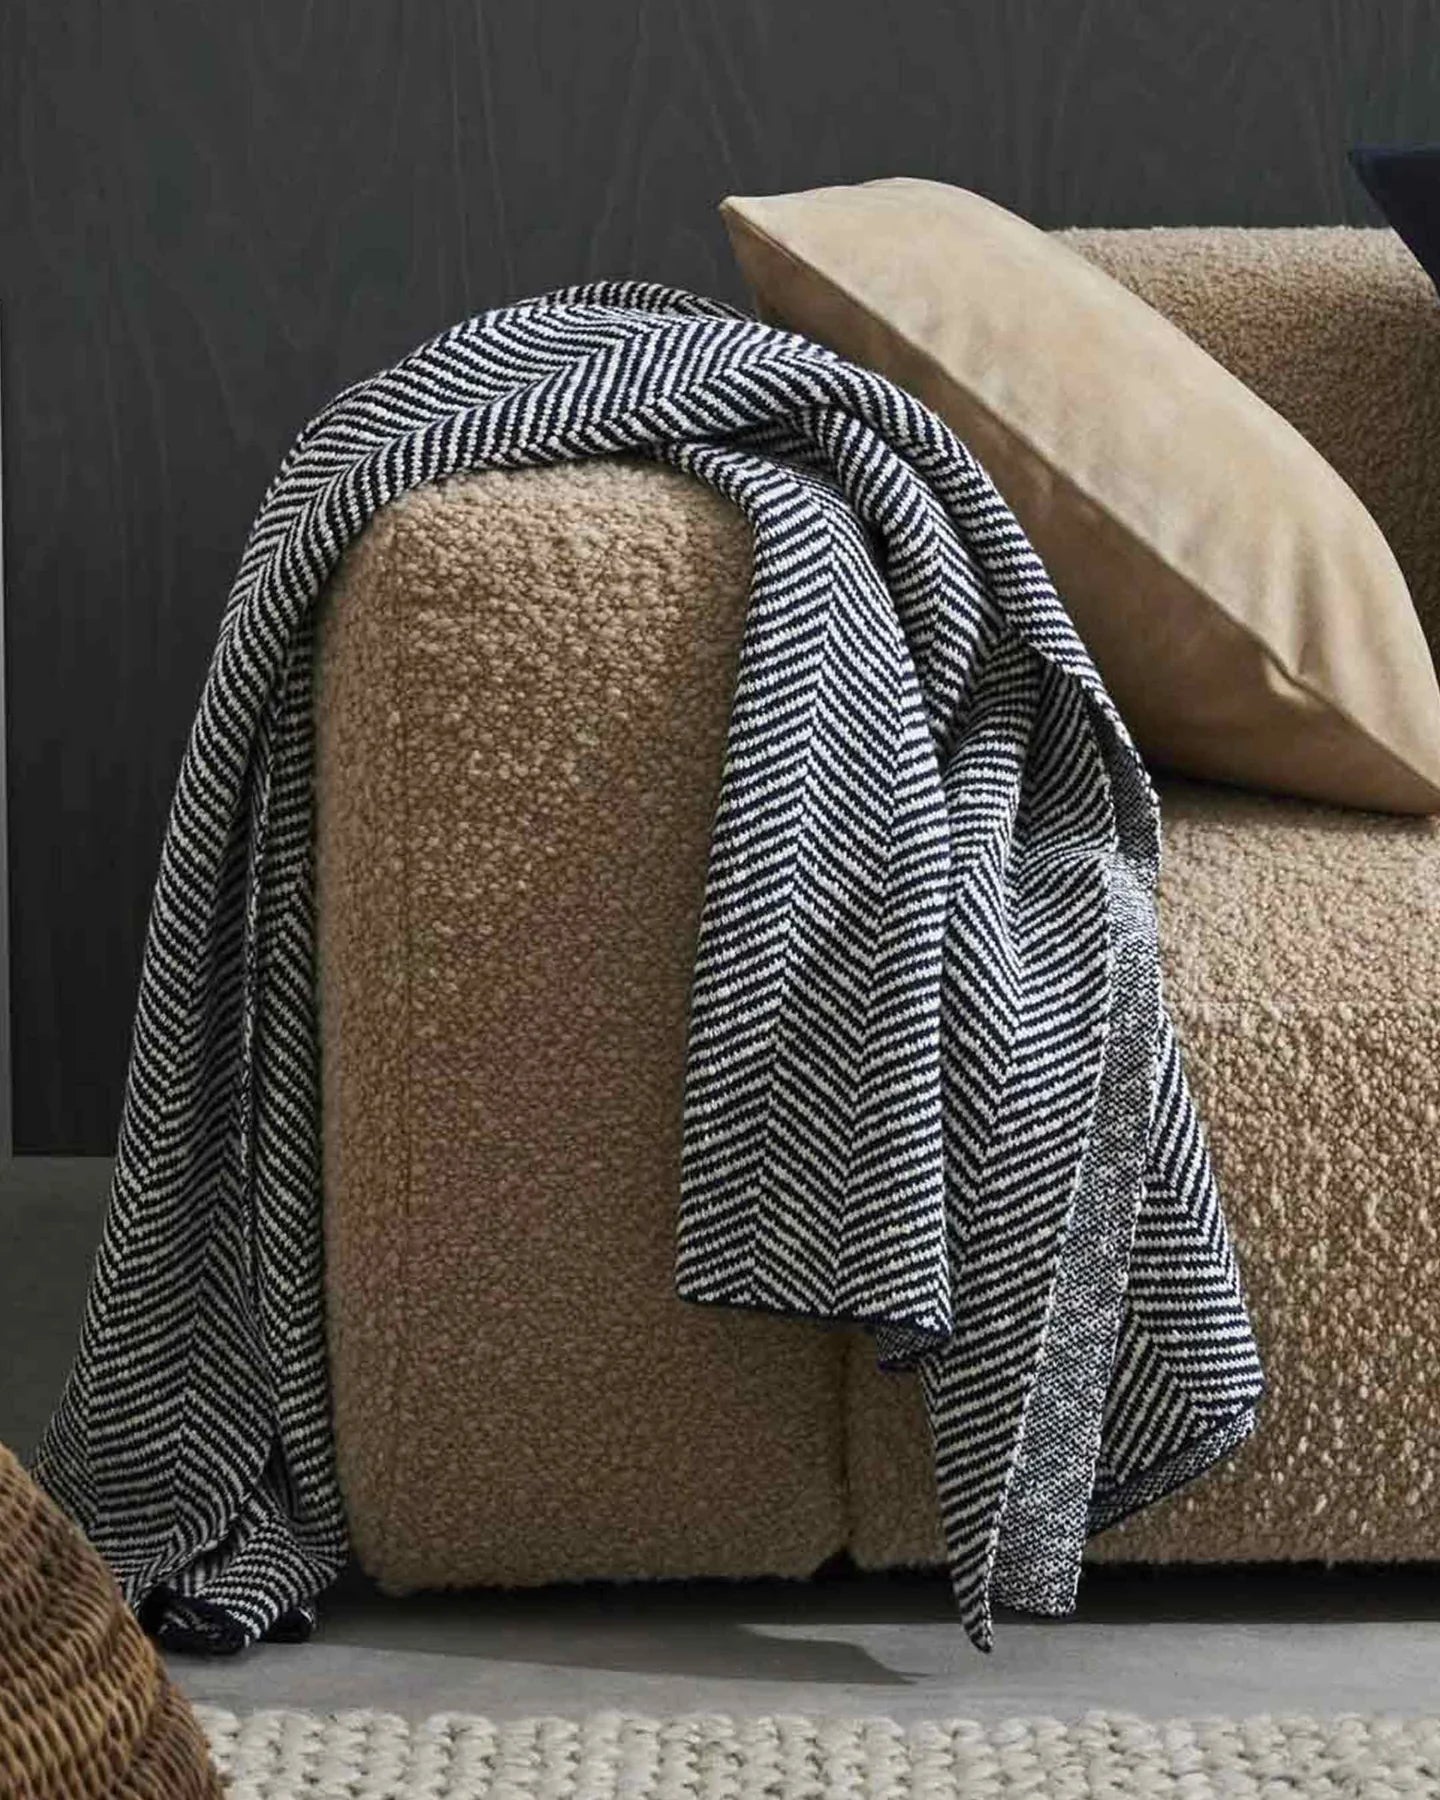 Made from 100% cotton, Solano is a beautifully soft, herringbone throw with a bouclé reverse for a sophisticated style.